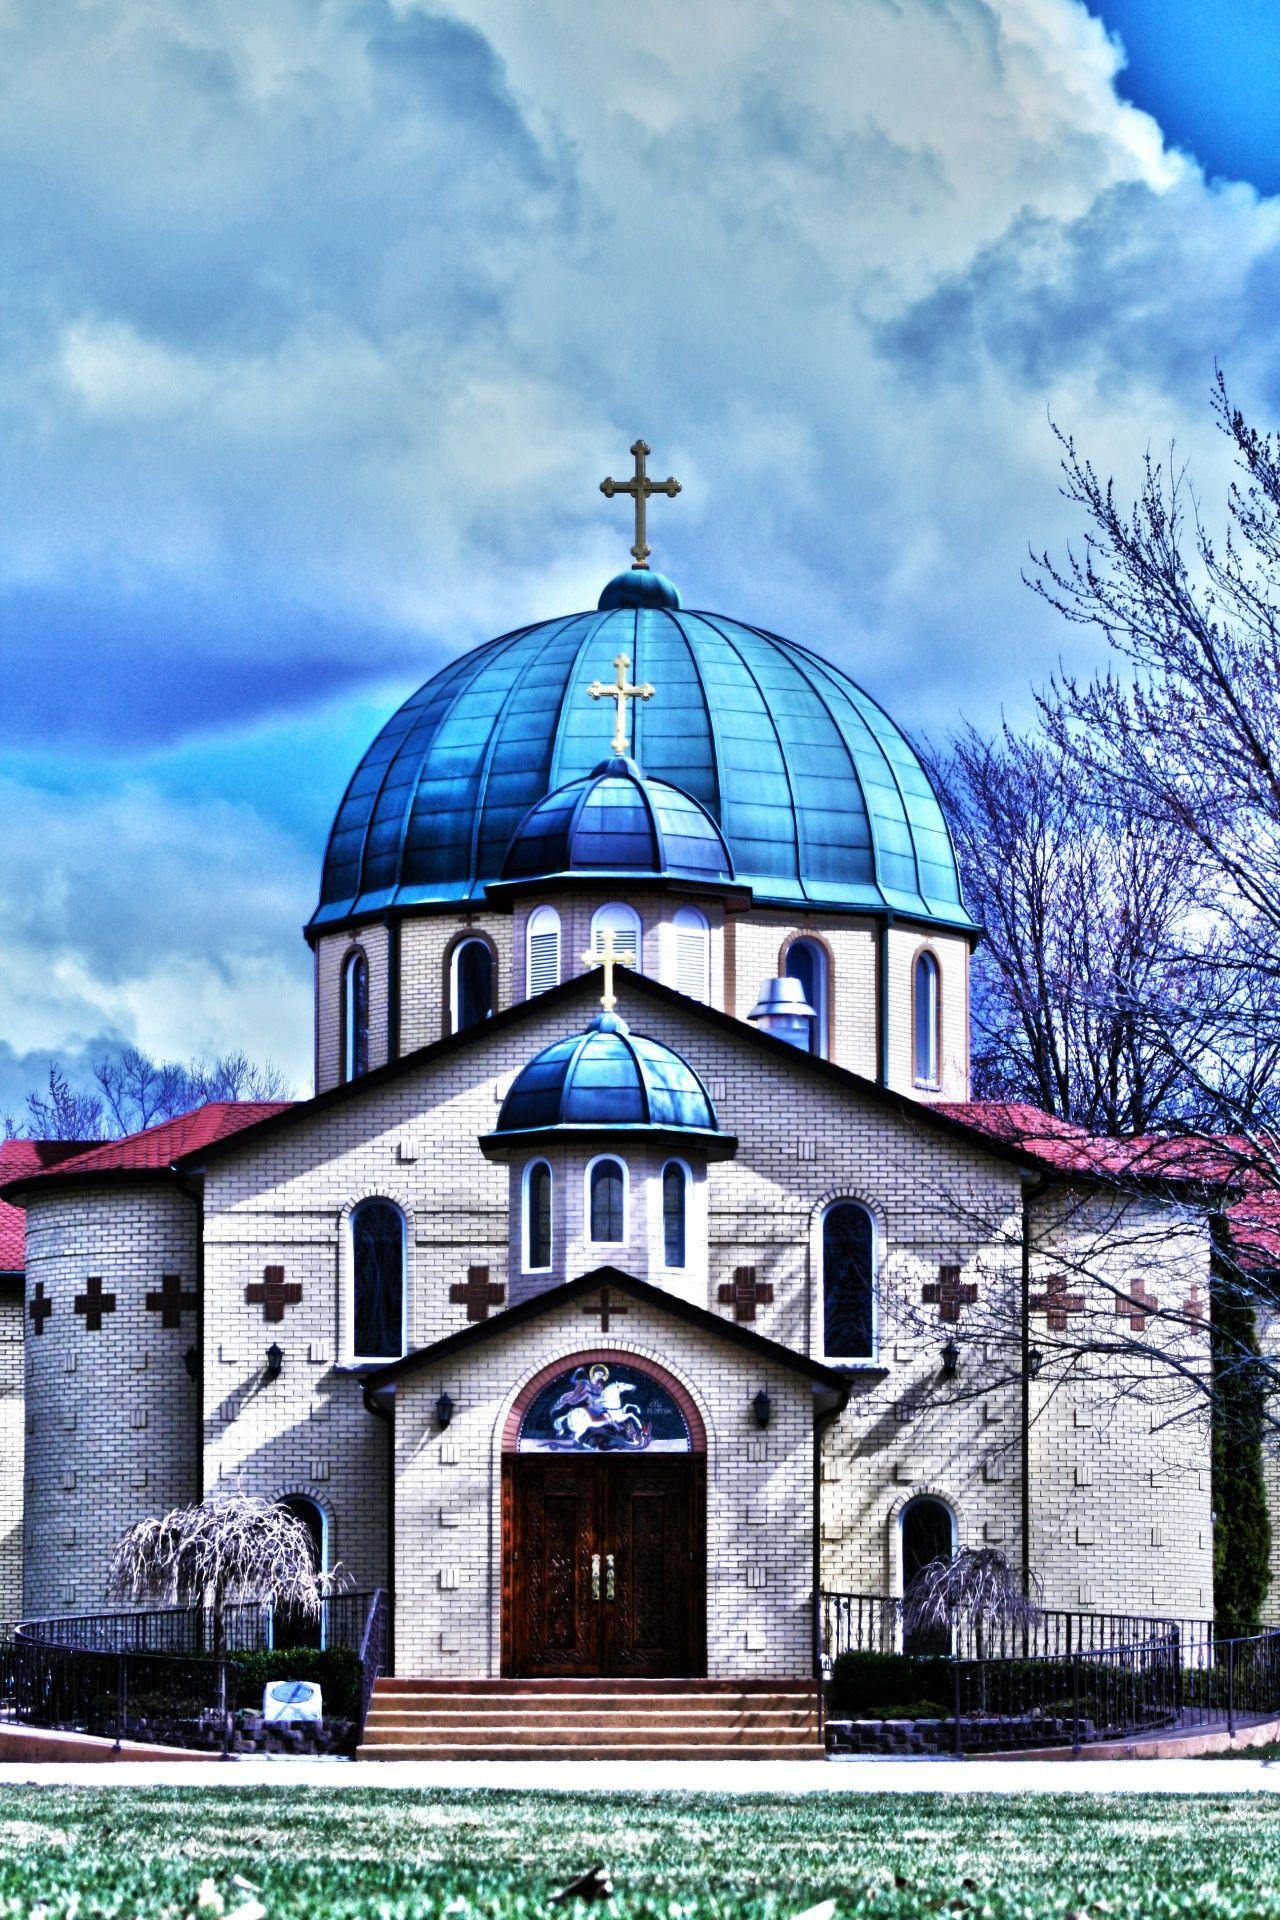 beautiful dome church image download full free high definition. HD